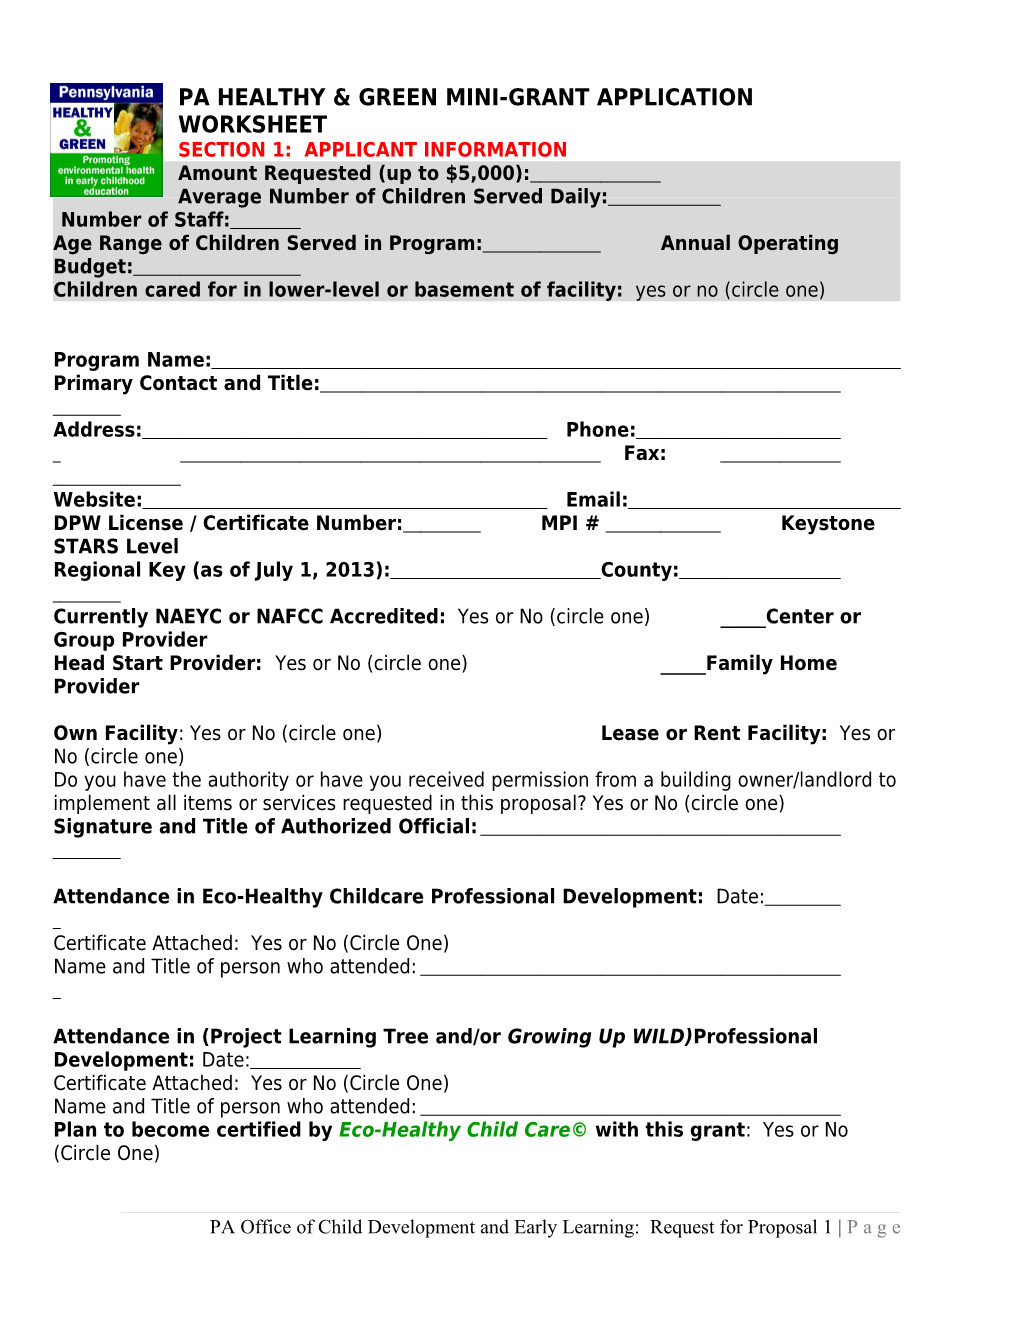 PA Healthy & Green Mini-Grant Application Worksheet Section 1: Applicant Information